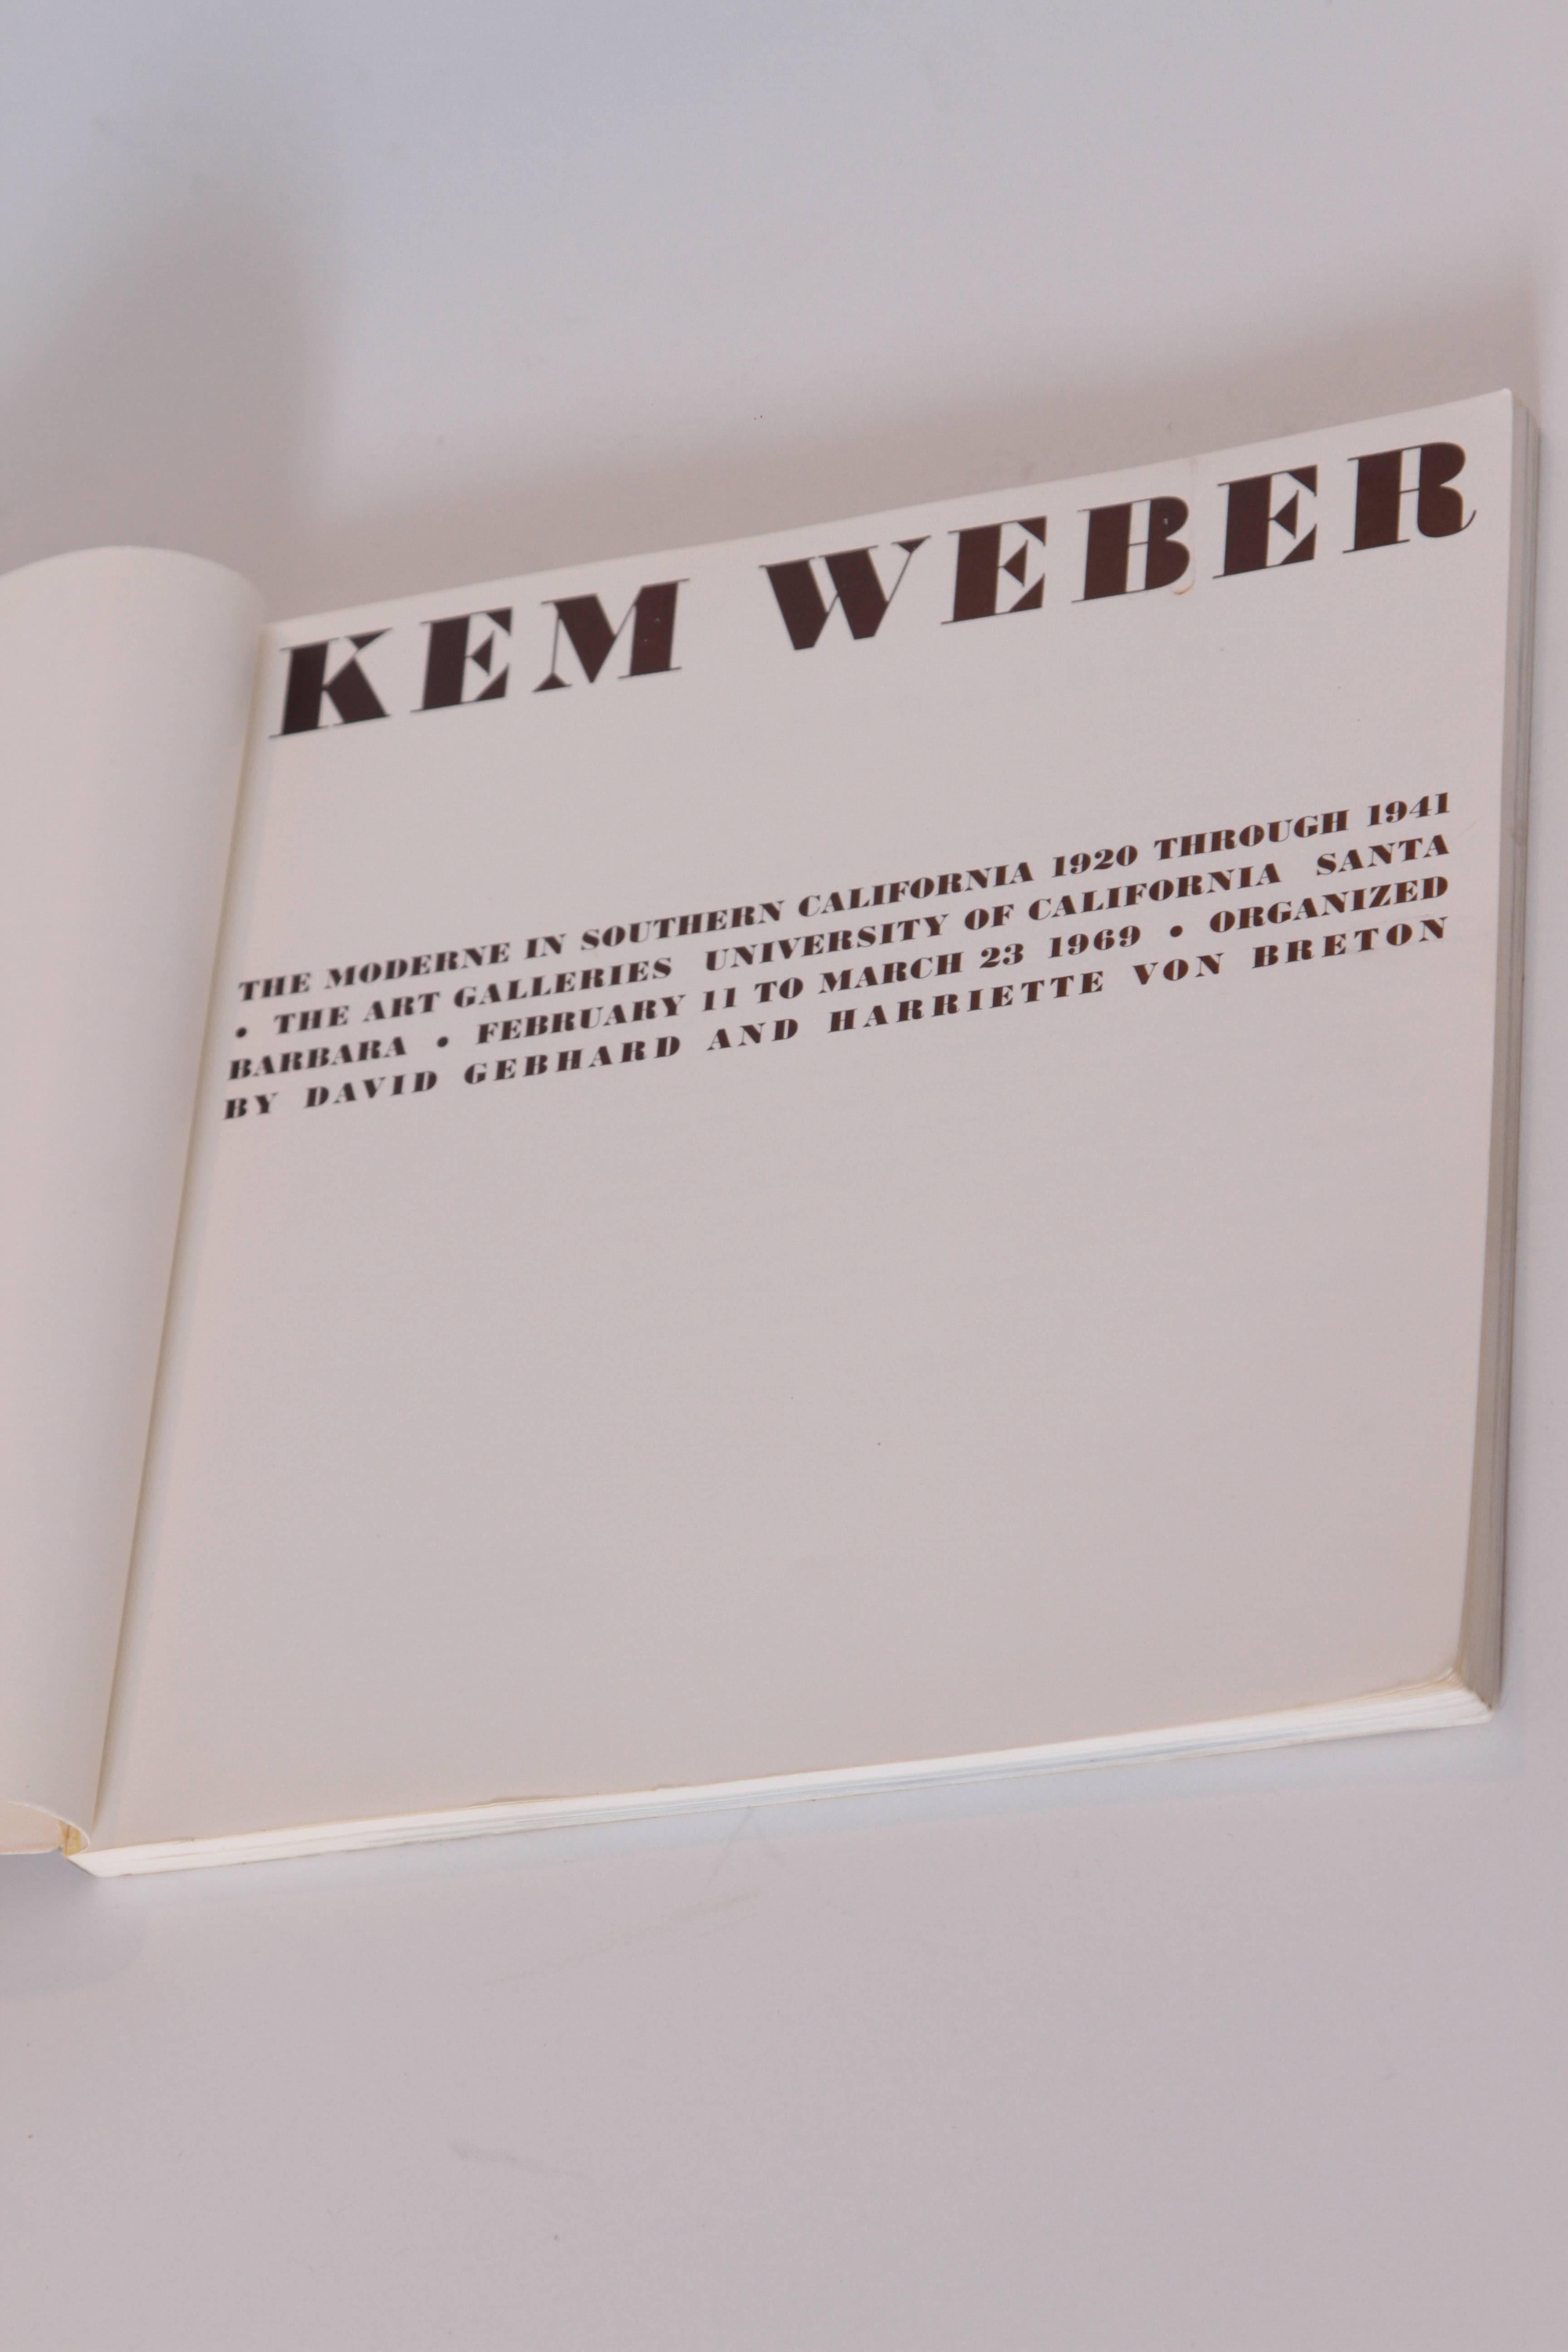 KEM Weber the Moderne in Southern California, 1920-1941 Monograph with Ephemera In Good Condition For Sale In Dallas, TX